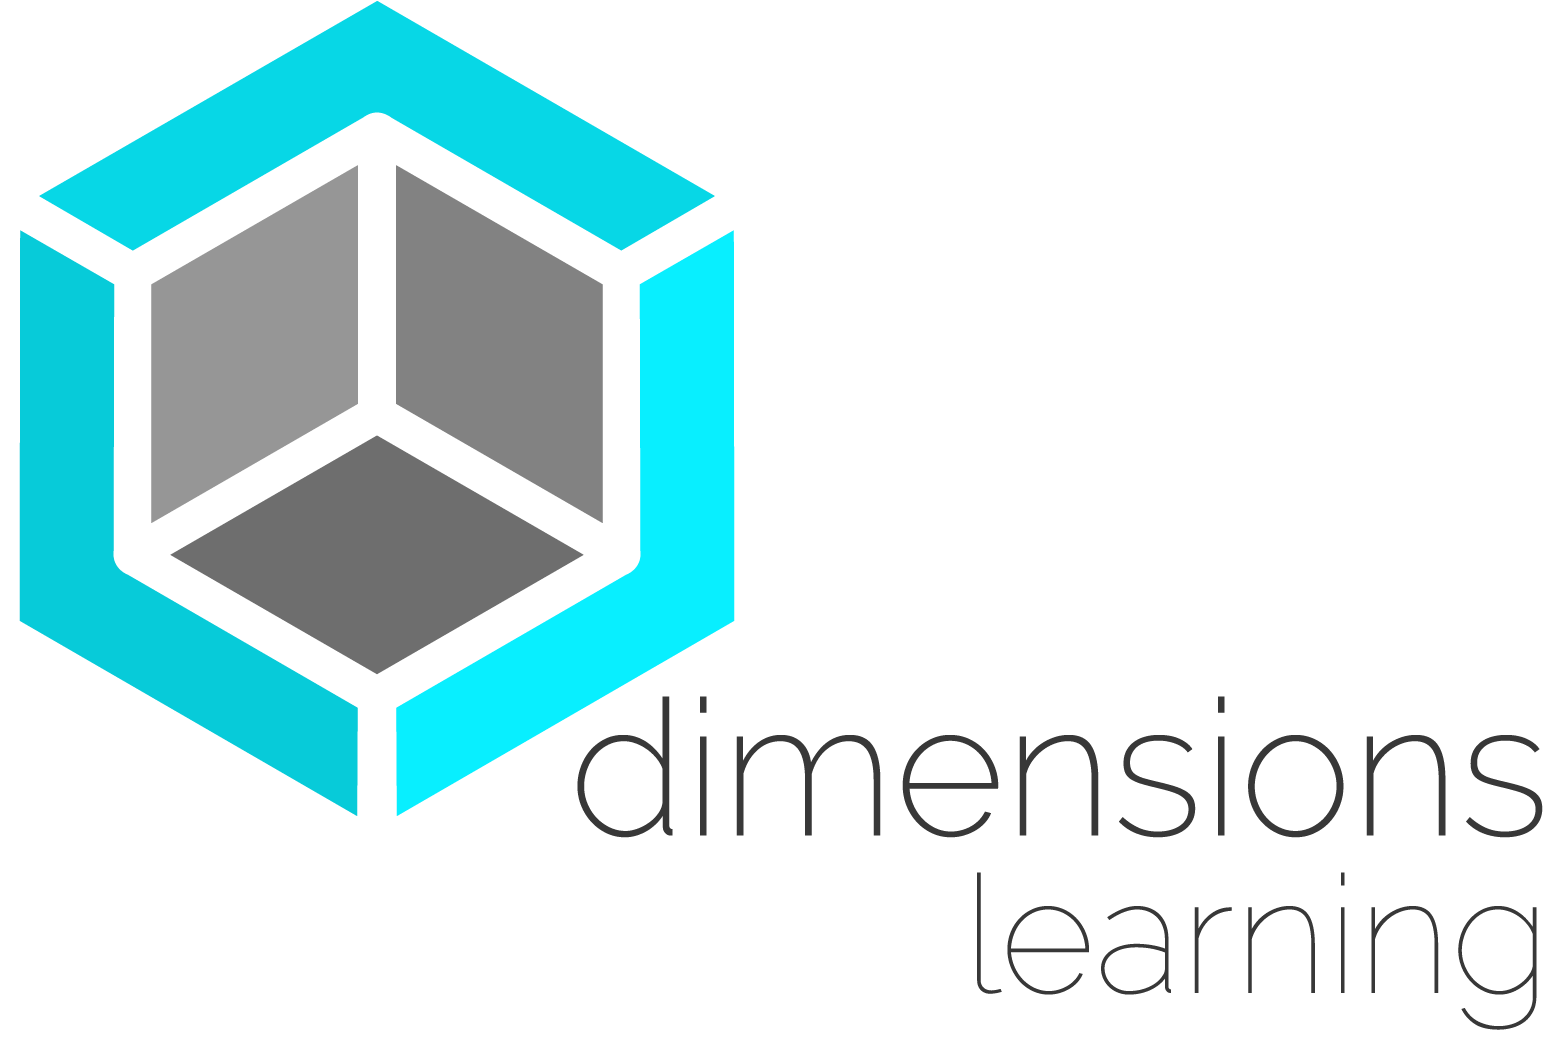 Image of Dimensions Learning